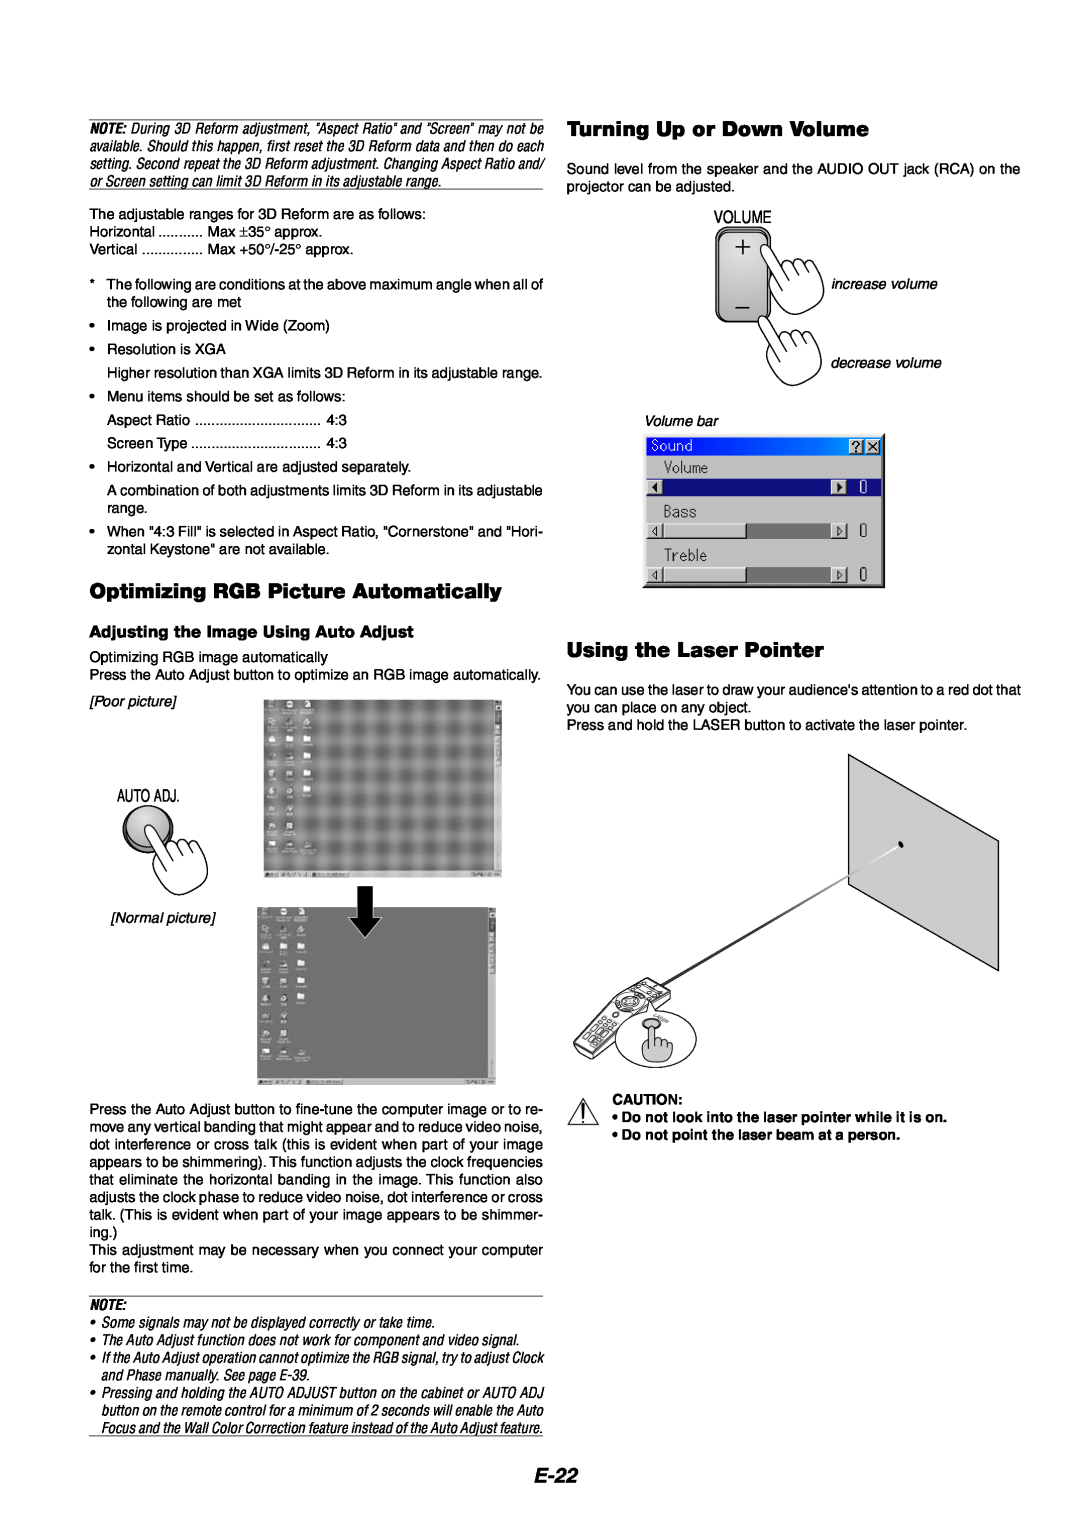 NEC MT1060 user manual Optimizing RGB Picture Automatically, Turning Up or Down Volume, Using the Laser Pointer, E-22 